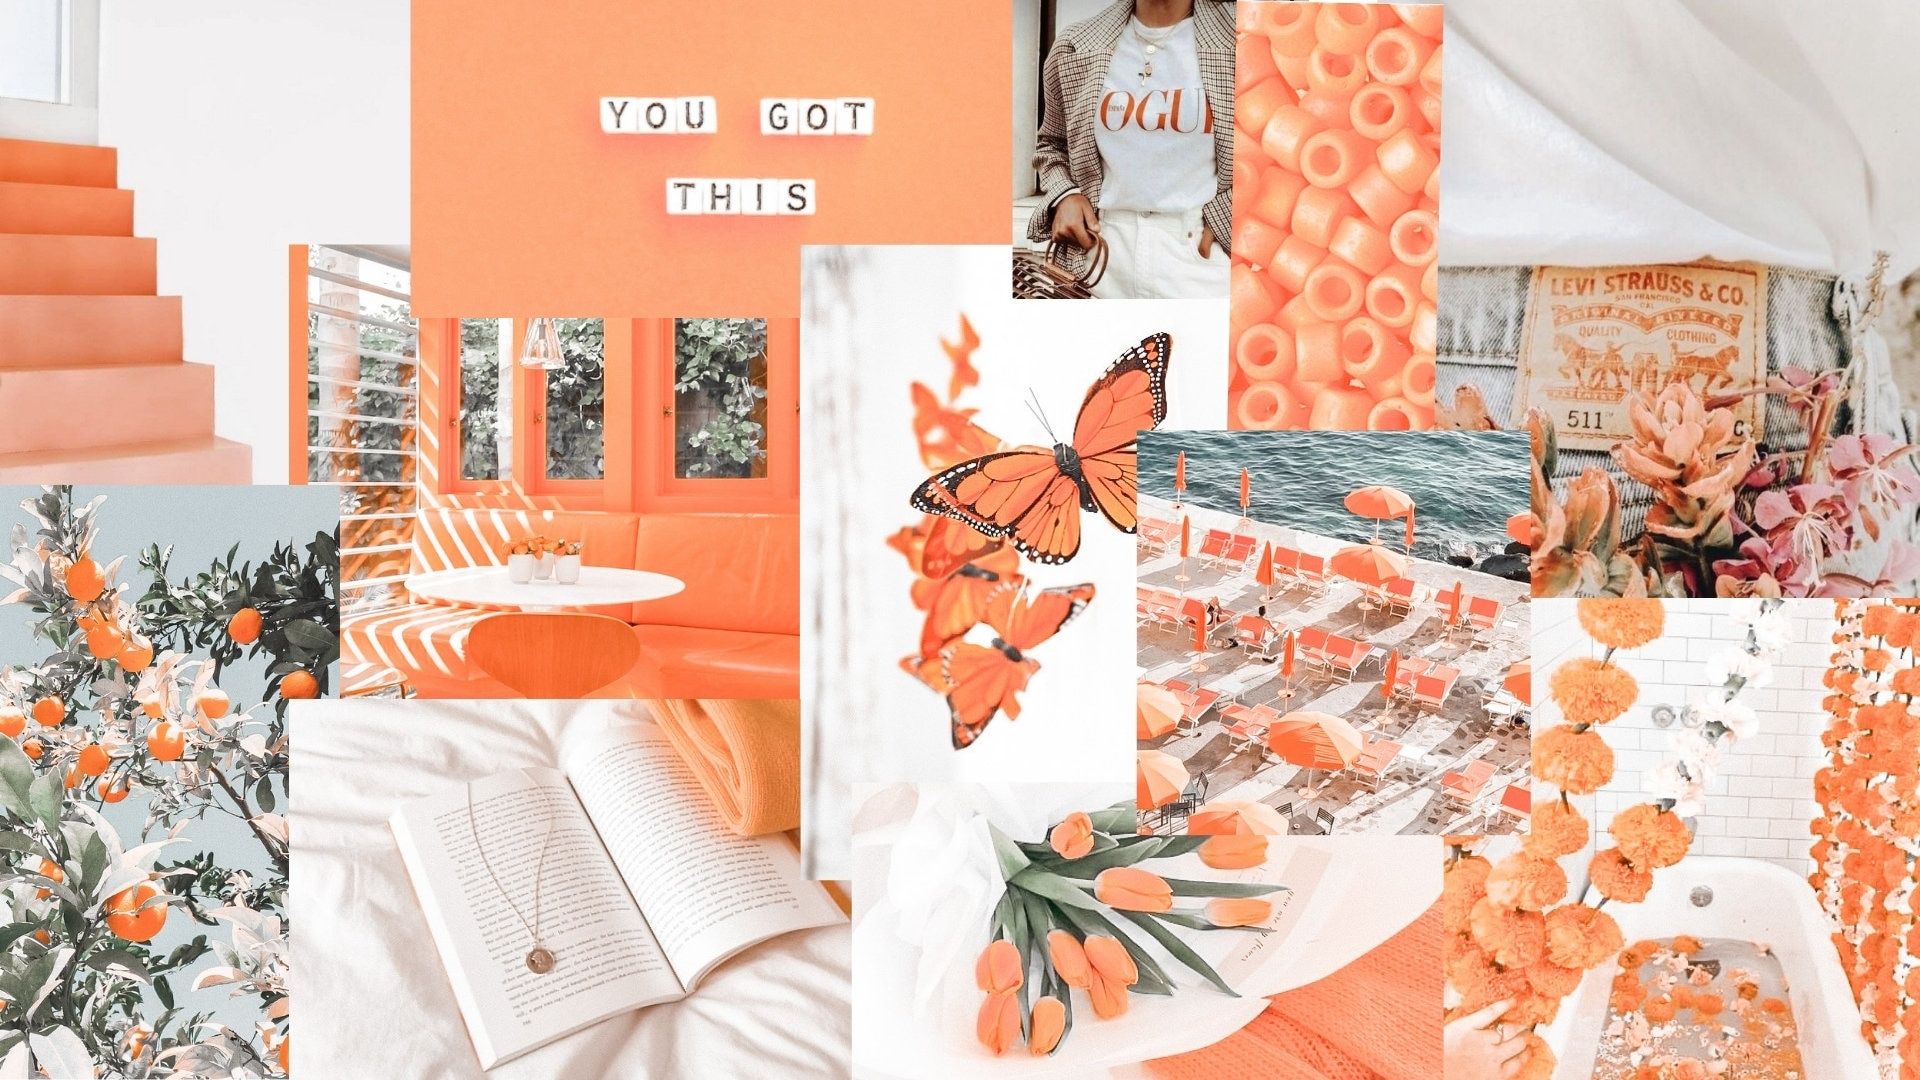 A collage of orange aesthetic images including flowers, a butterfly, a book, and a living room. - Dark orange